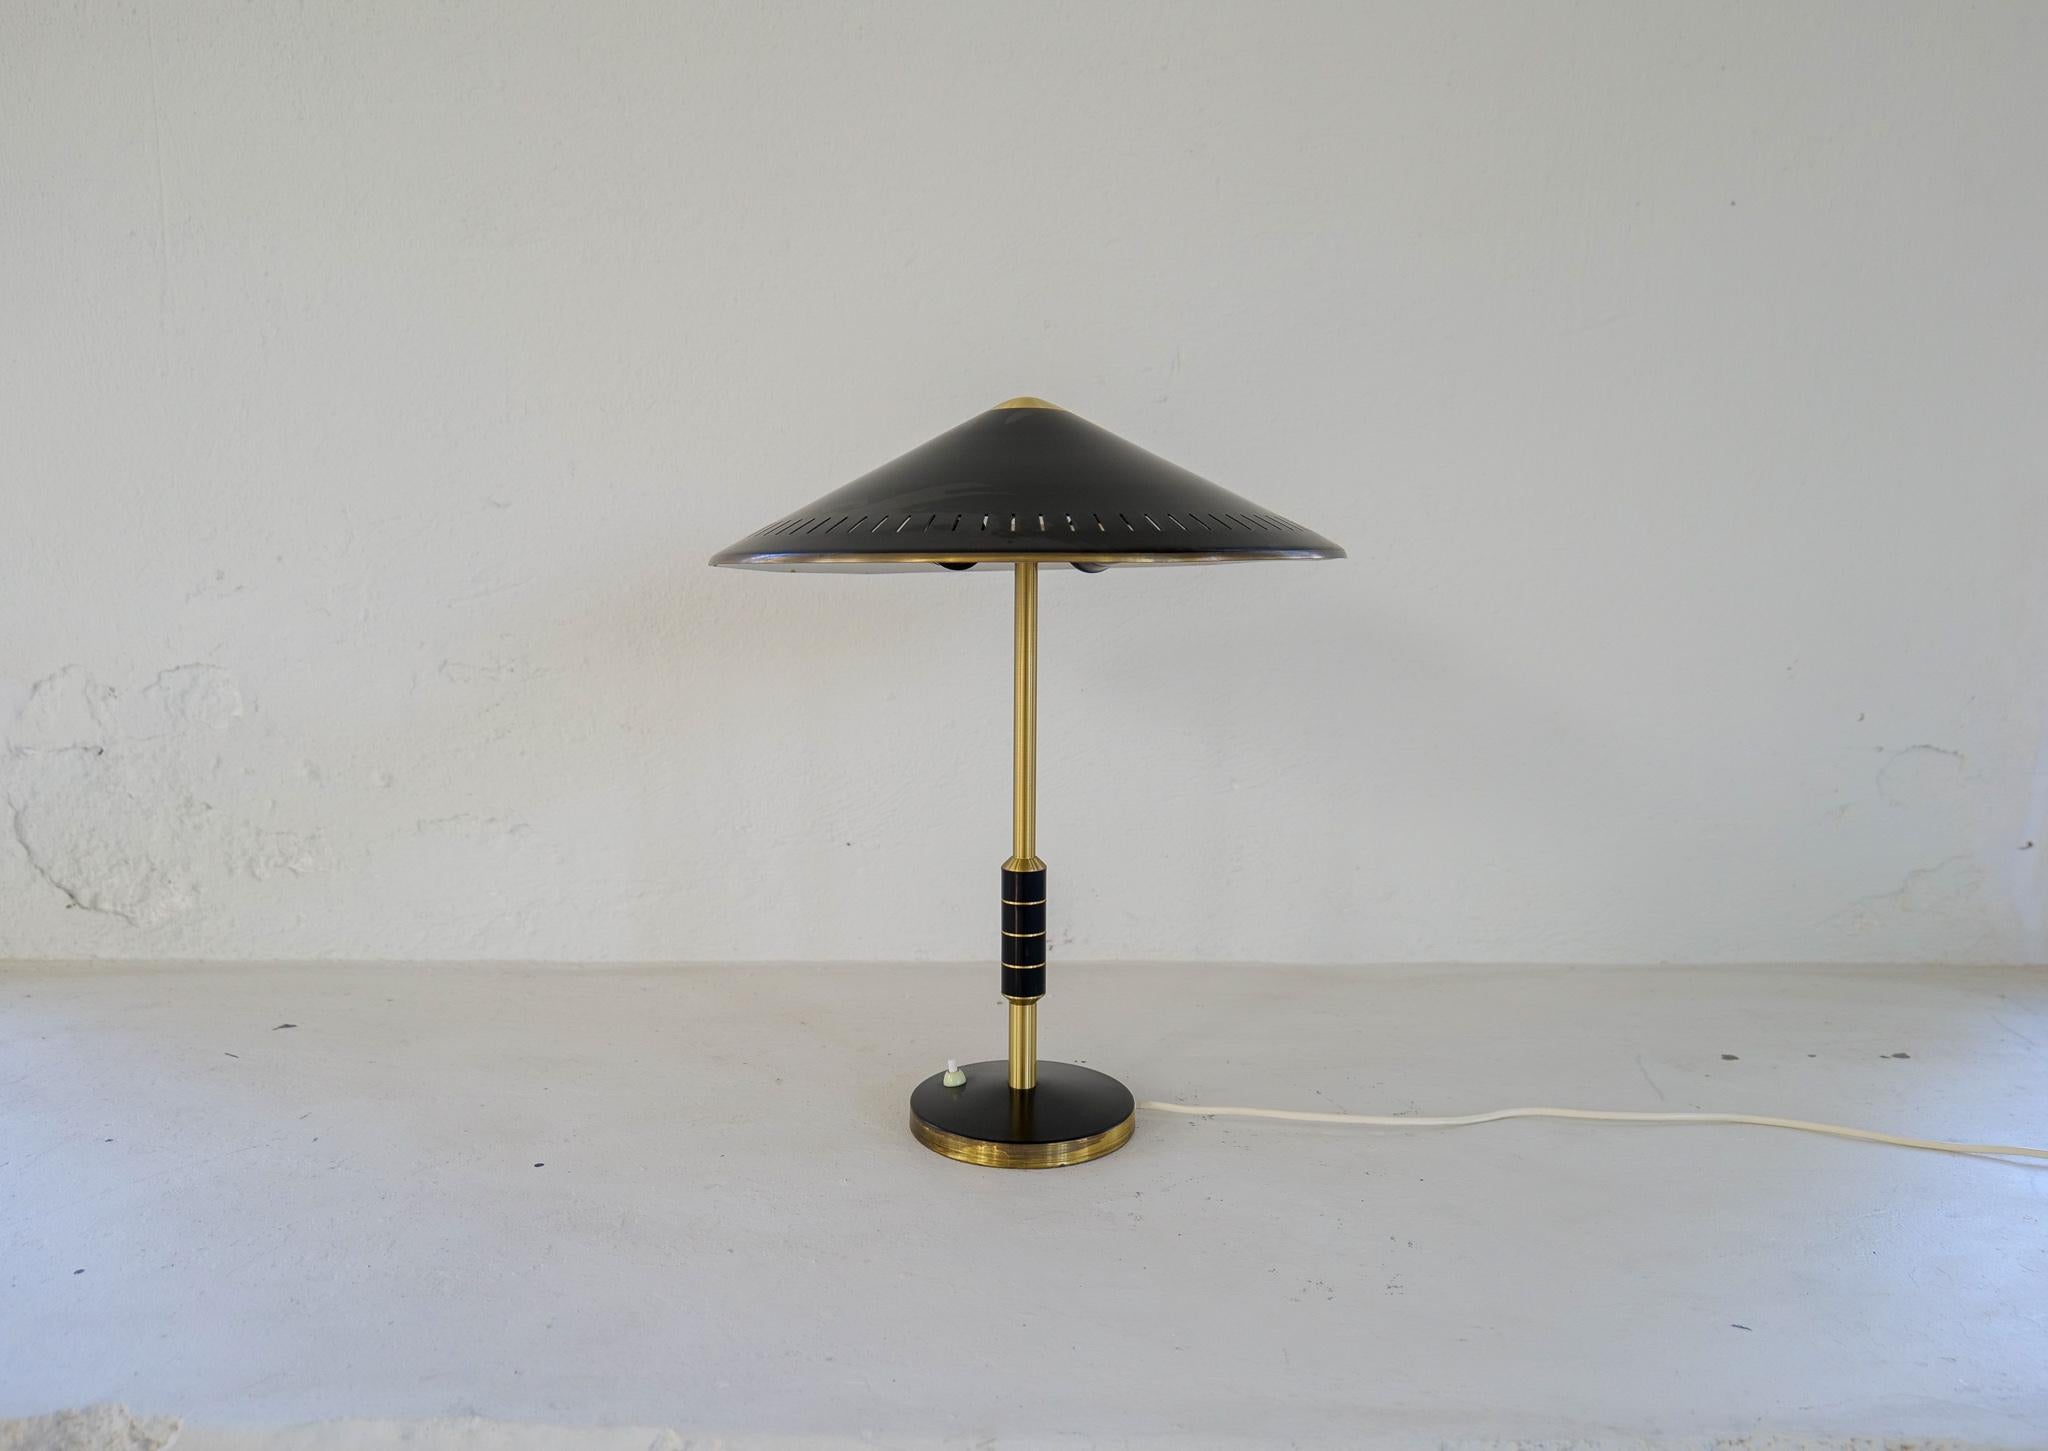 Midcentury Danish brass table lamp from Lyfa and designed by Bent Karlby 1956 Denmark. 
This somewhat rare black mode B146 with solid brass with two-light sources, stem decorated with black metal banding.

Good vintage condition, with wear and